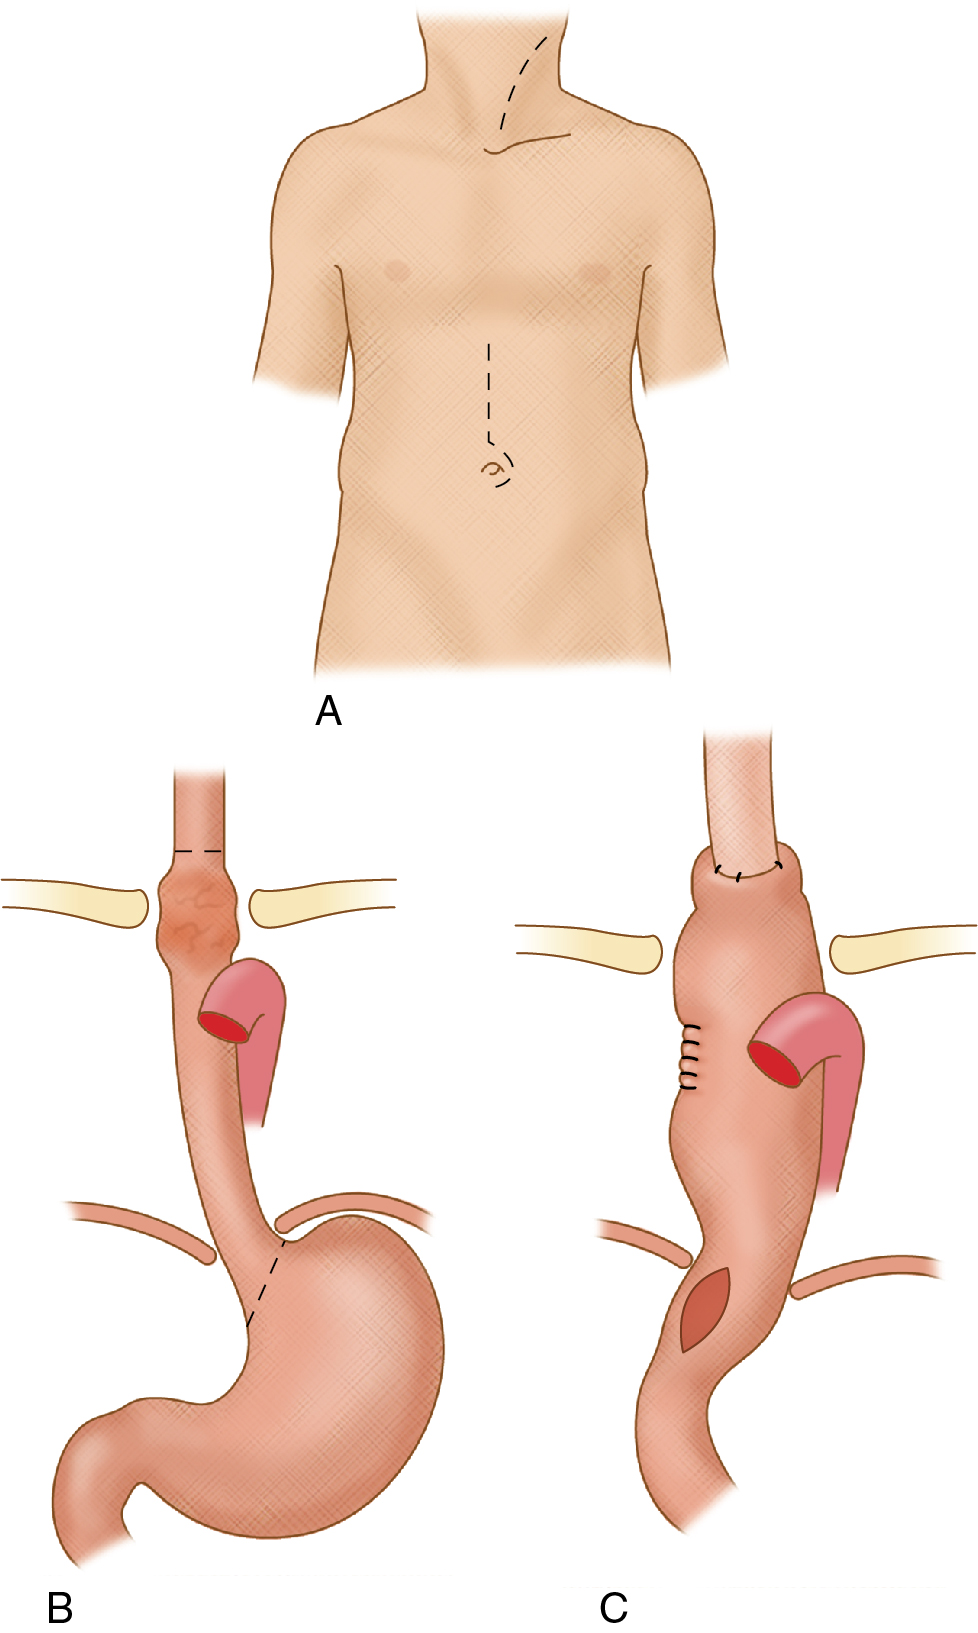 Fig. 7.2, Overview of transhiatal esophagectomy (A) with gastric mobilization and gastric pull-up (B) for cervicoesophagogastric anastomosis (C).